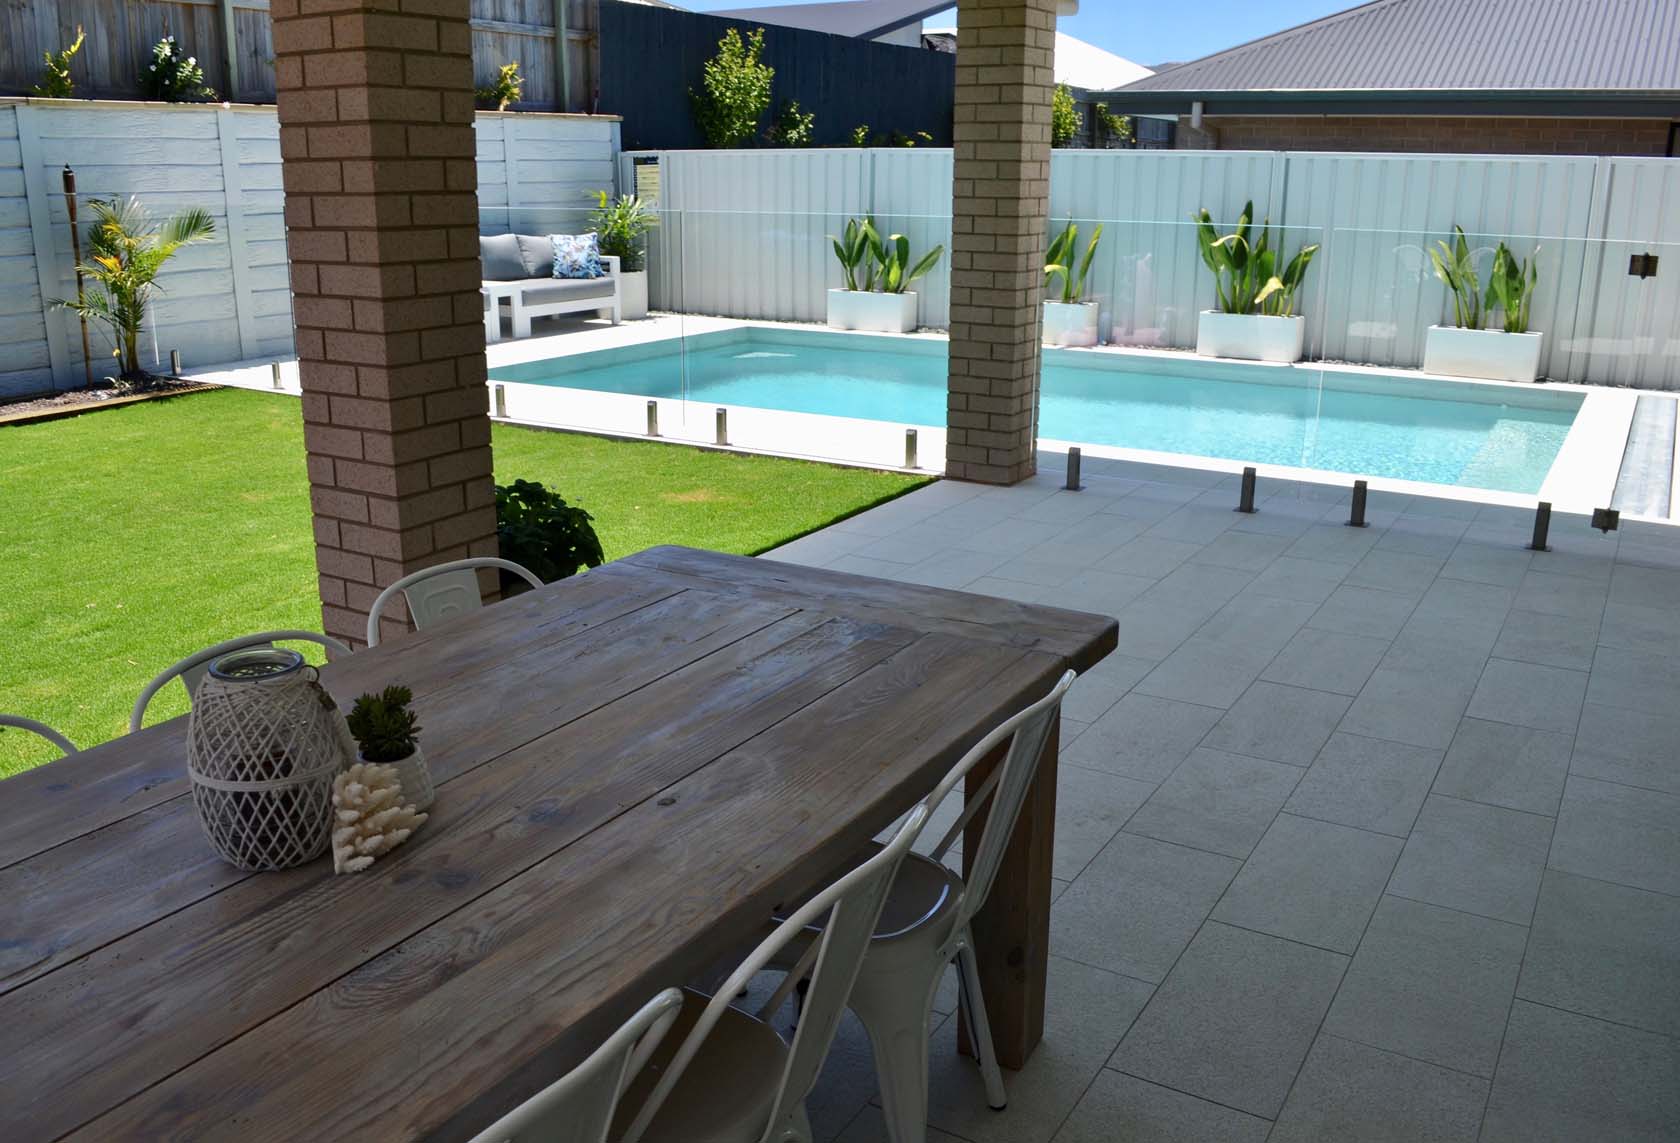 Coconut Drift Porcelain tiled outdoor area and pool and surrounds